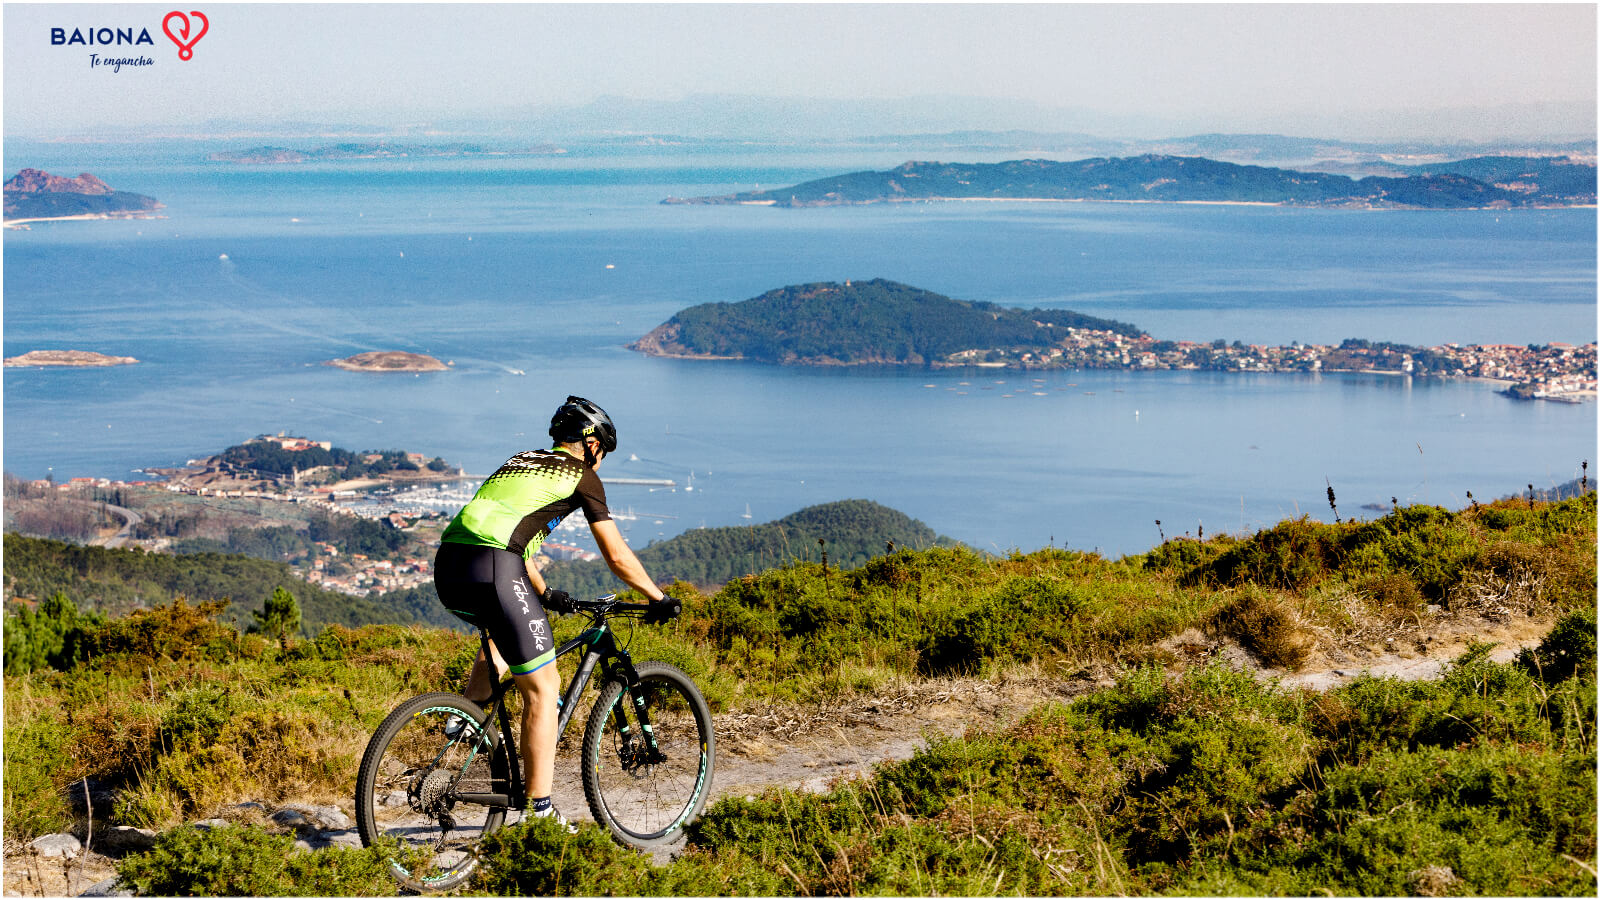 10 Best Things to do in Baiona, Galicia, Spain - 3. E-Biking in Monte A Groba Hill